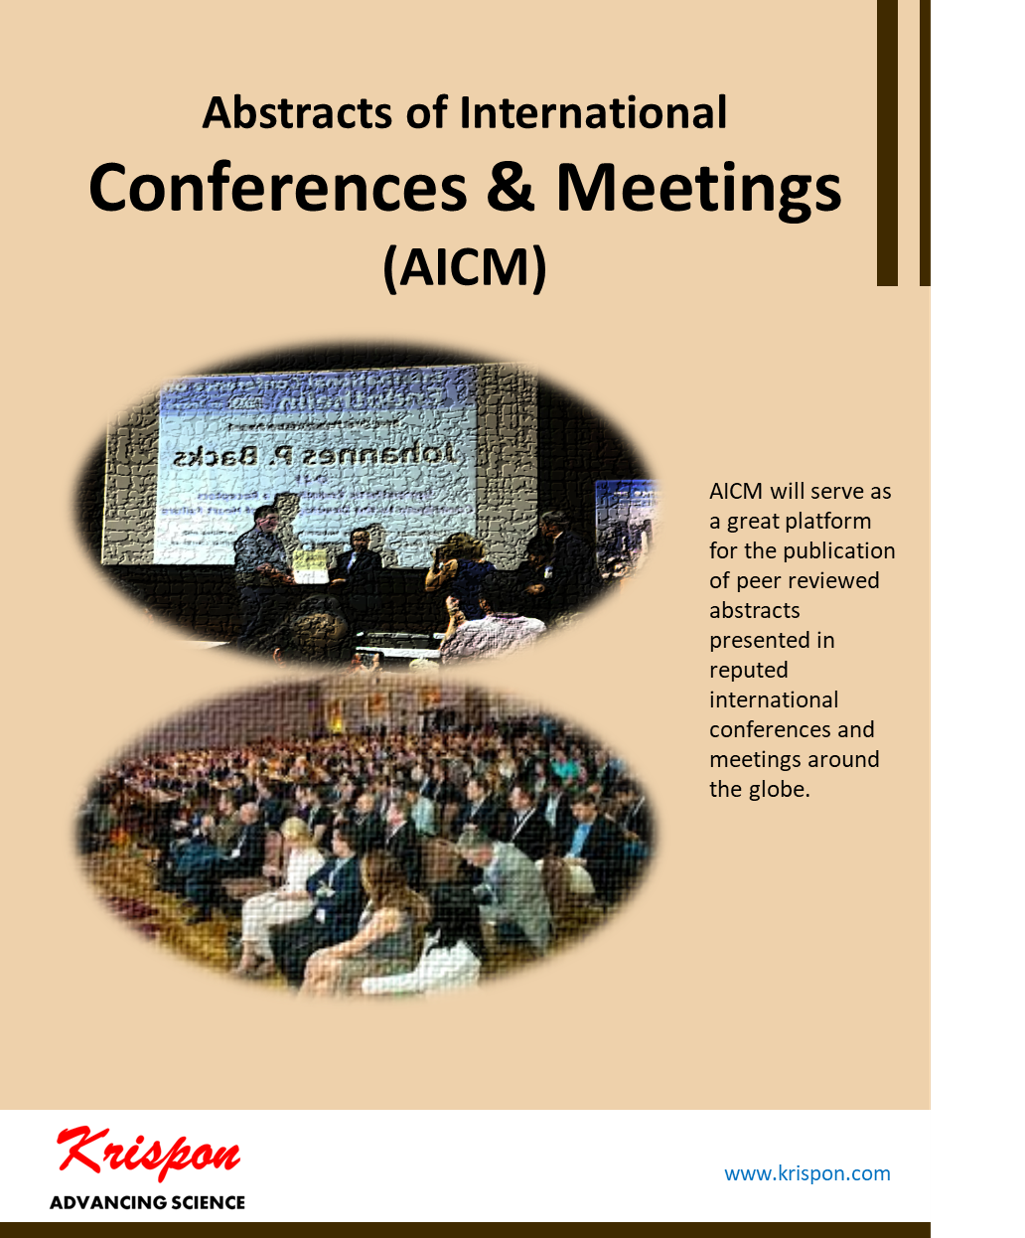 Abstracts of International Conferences & Meetings - AICM